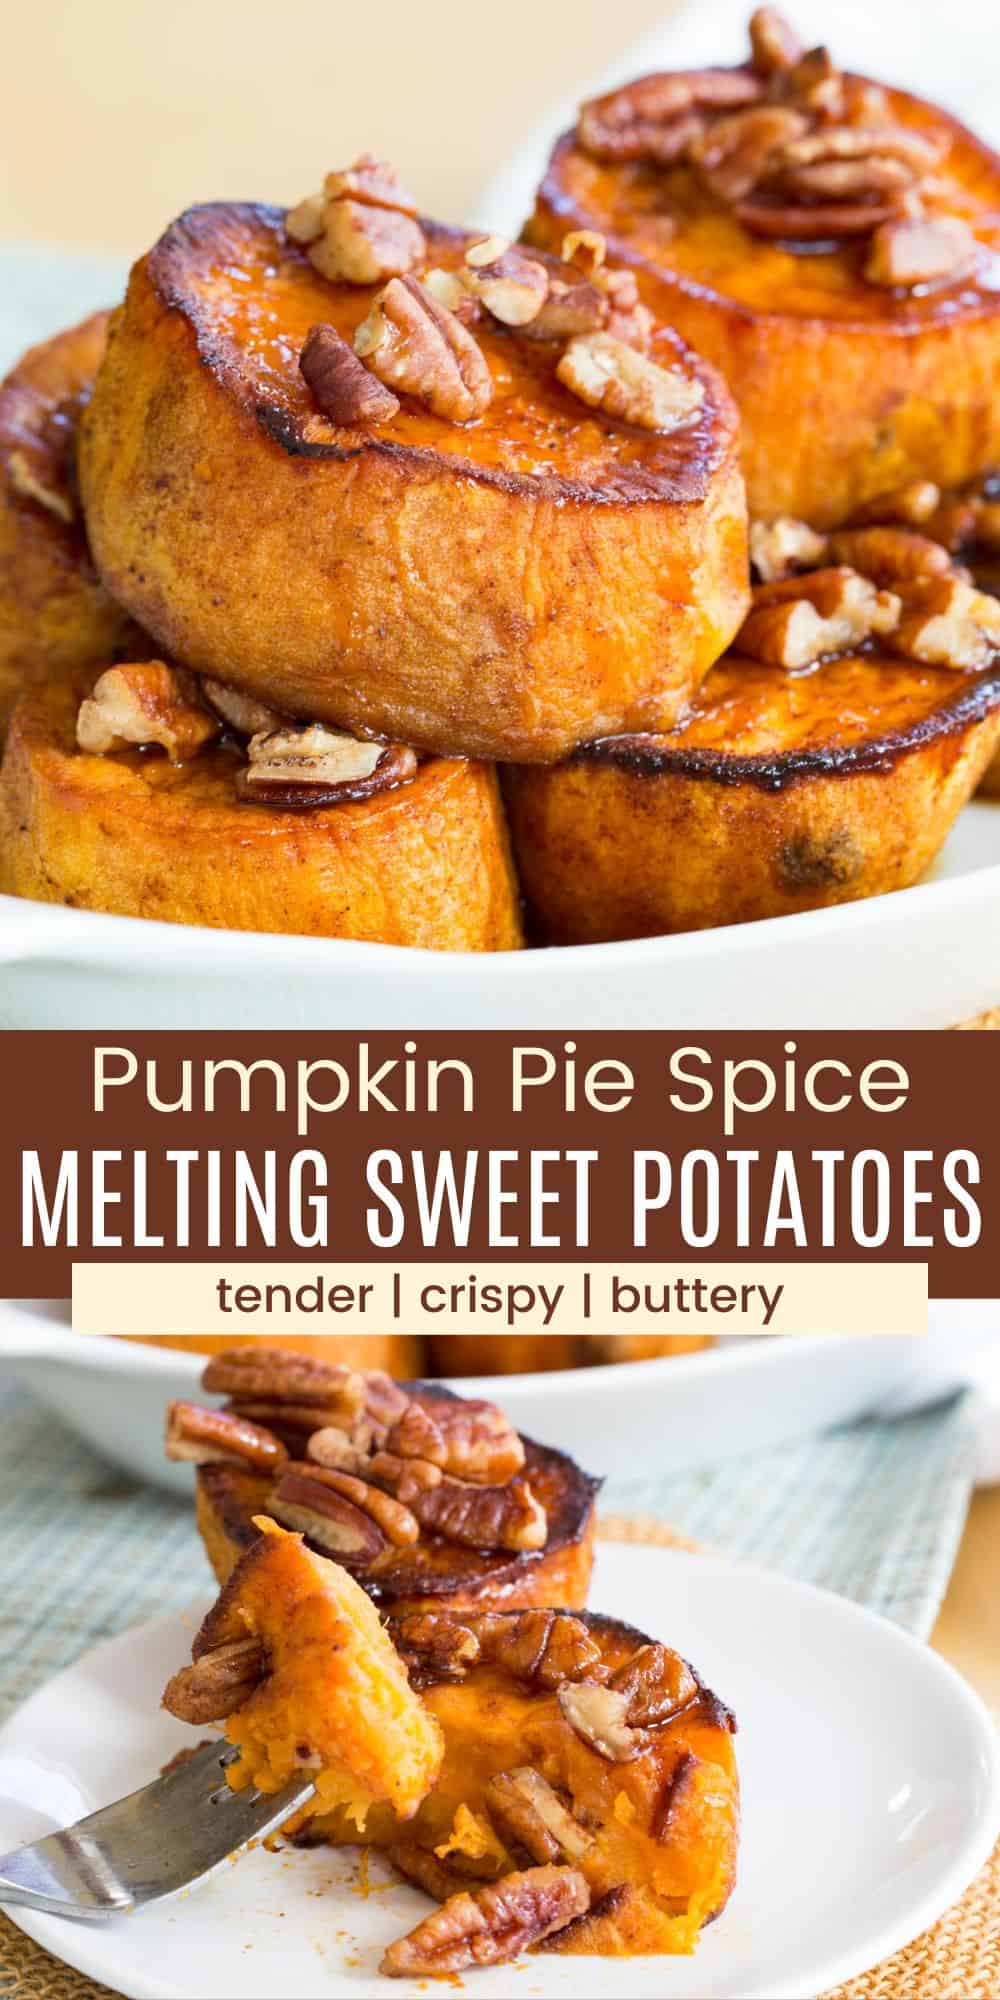 Pumpkin Spice Roasted Sweet Potatoes | Cupcakes & Kale Chips